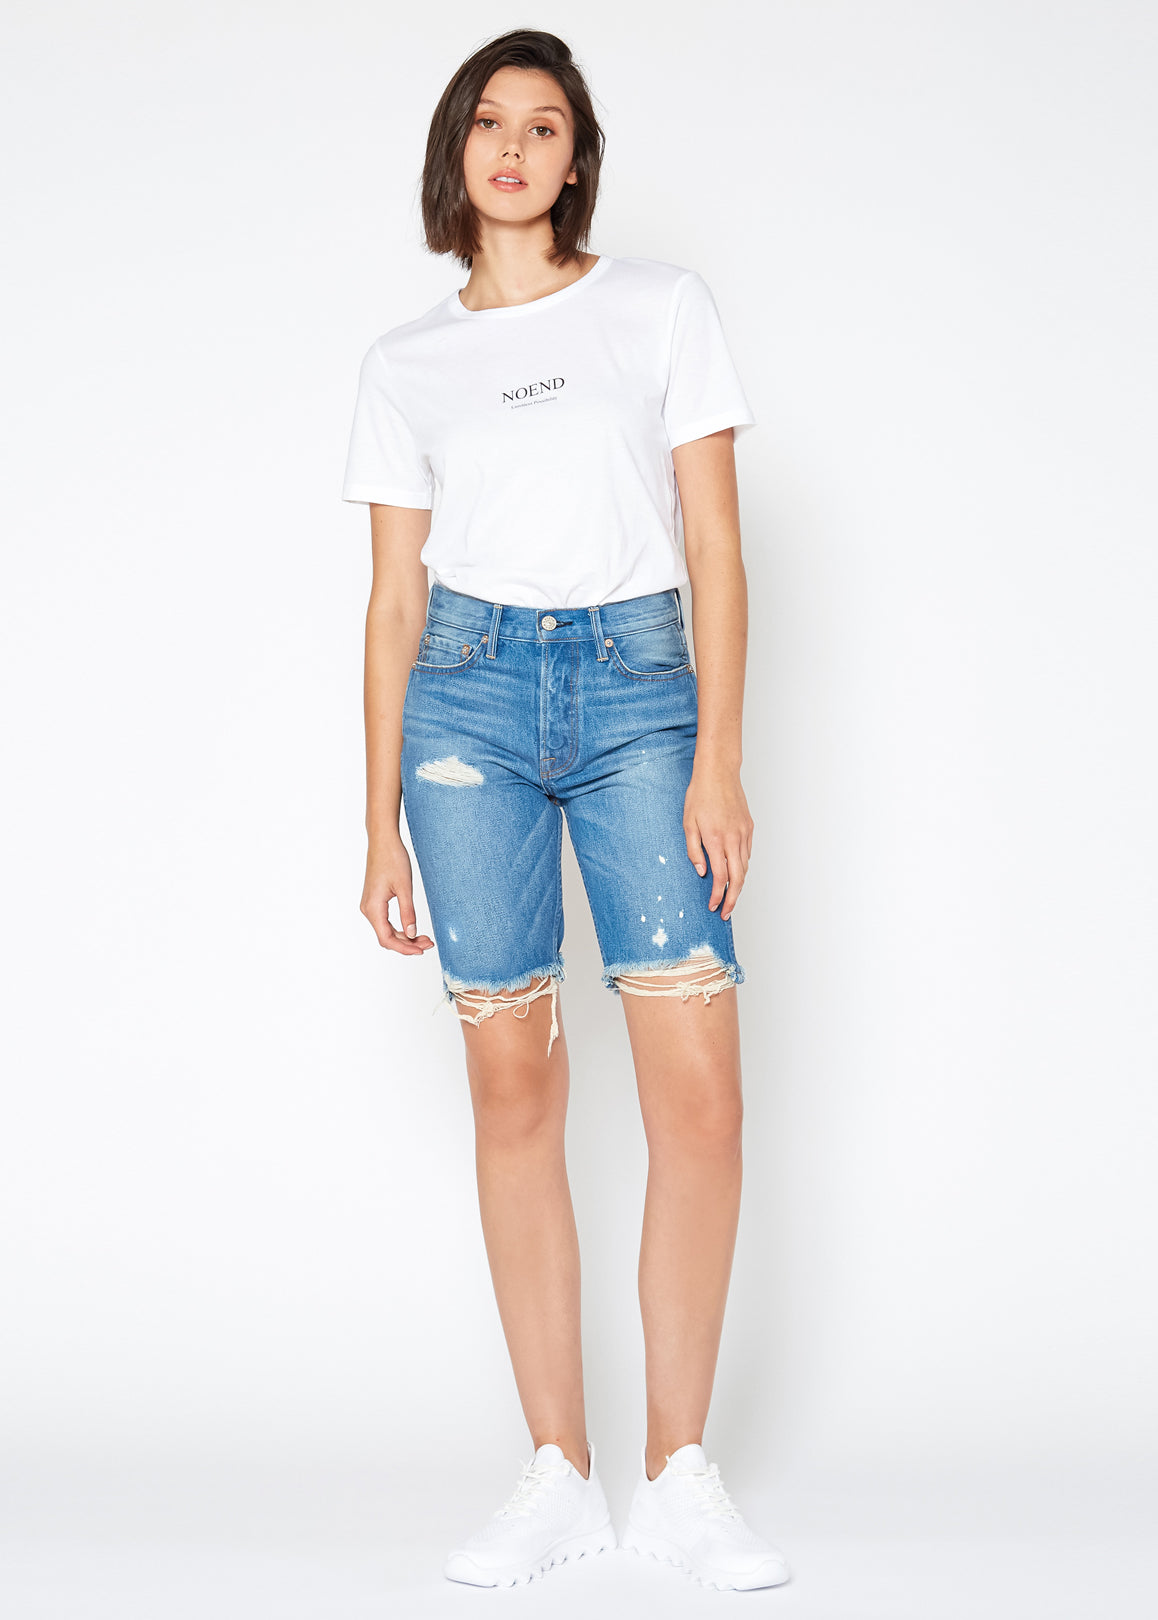 Muse 9 Shorts In Tennessee - Noend Denim